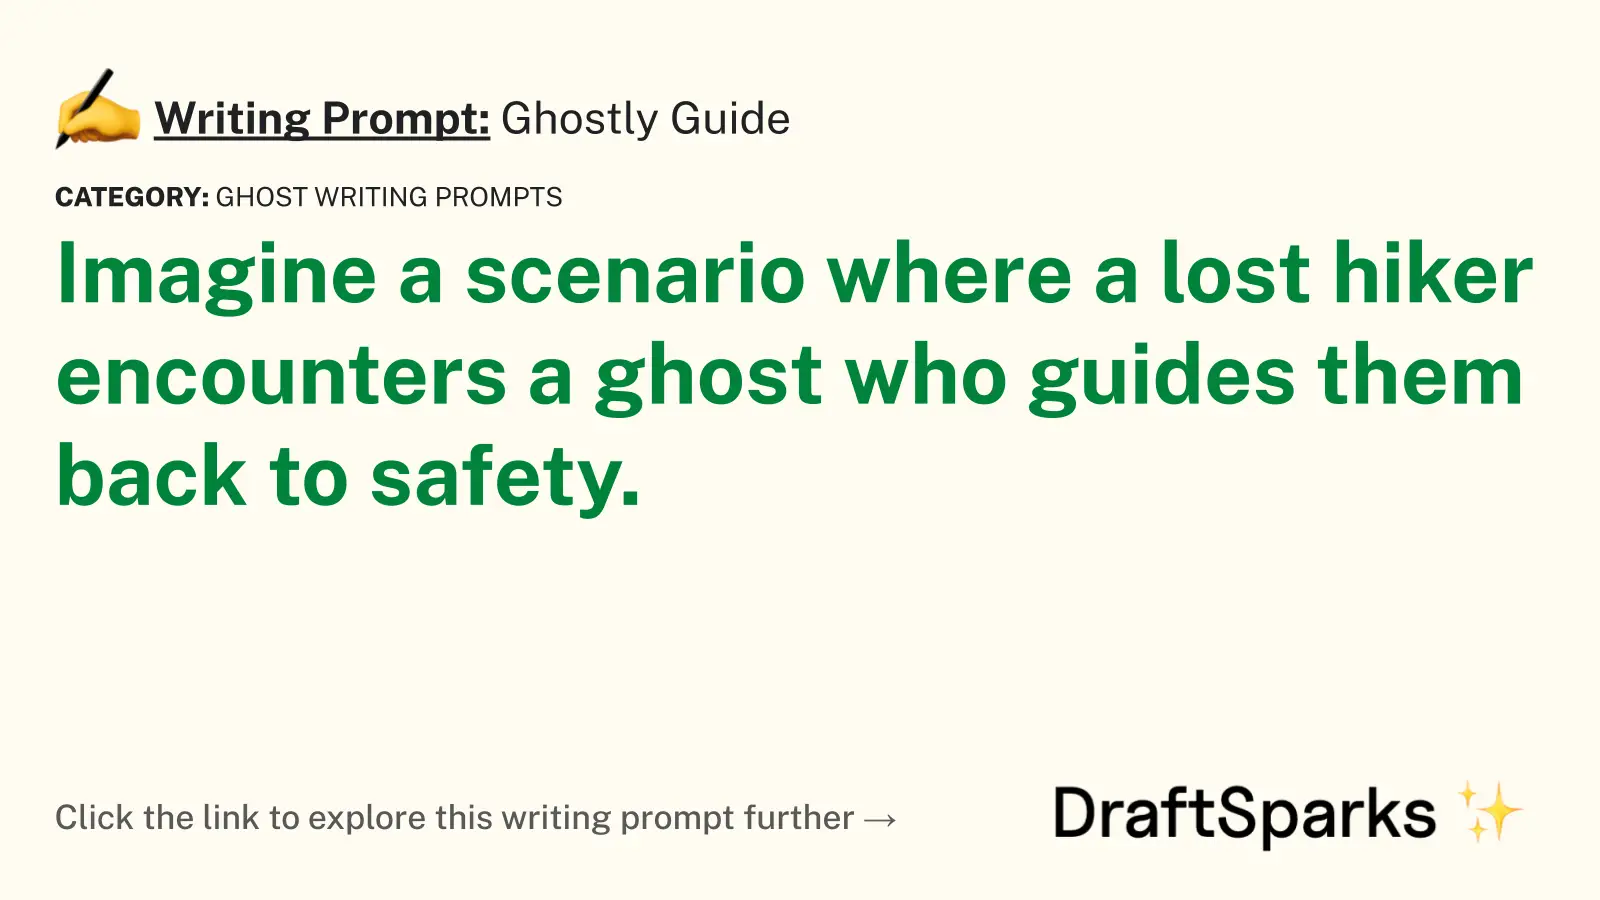 Ghostly Guide